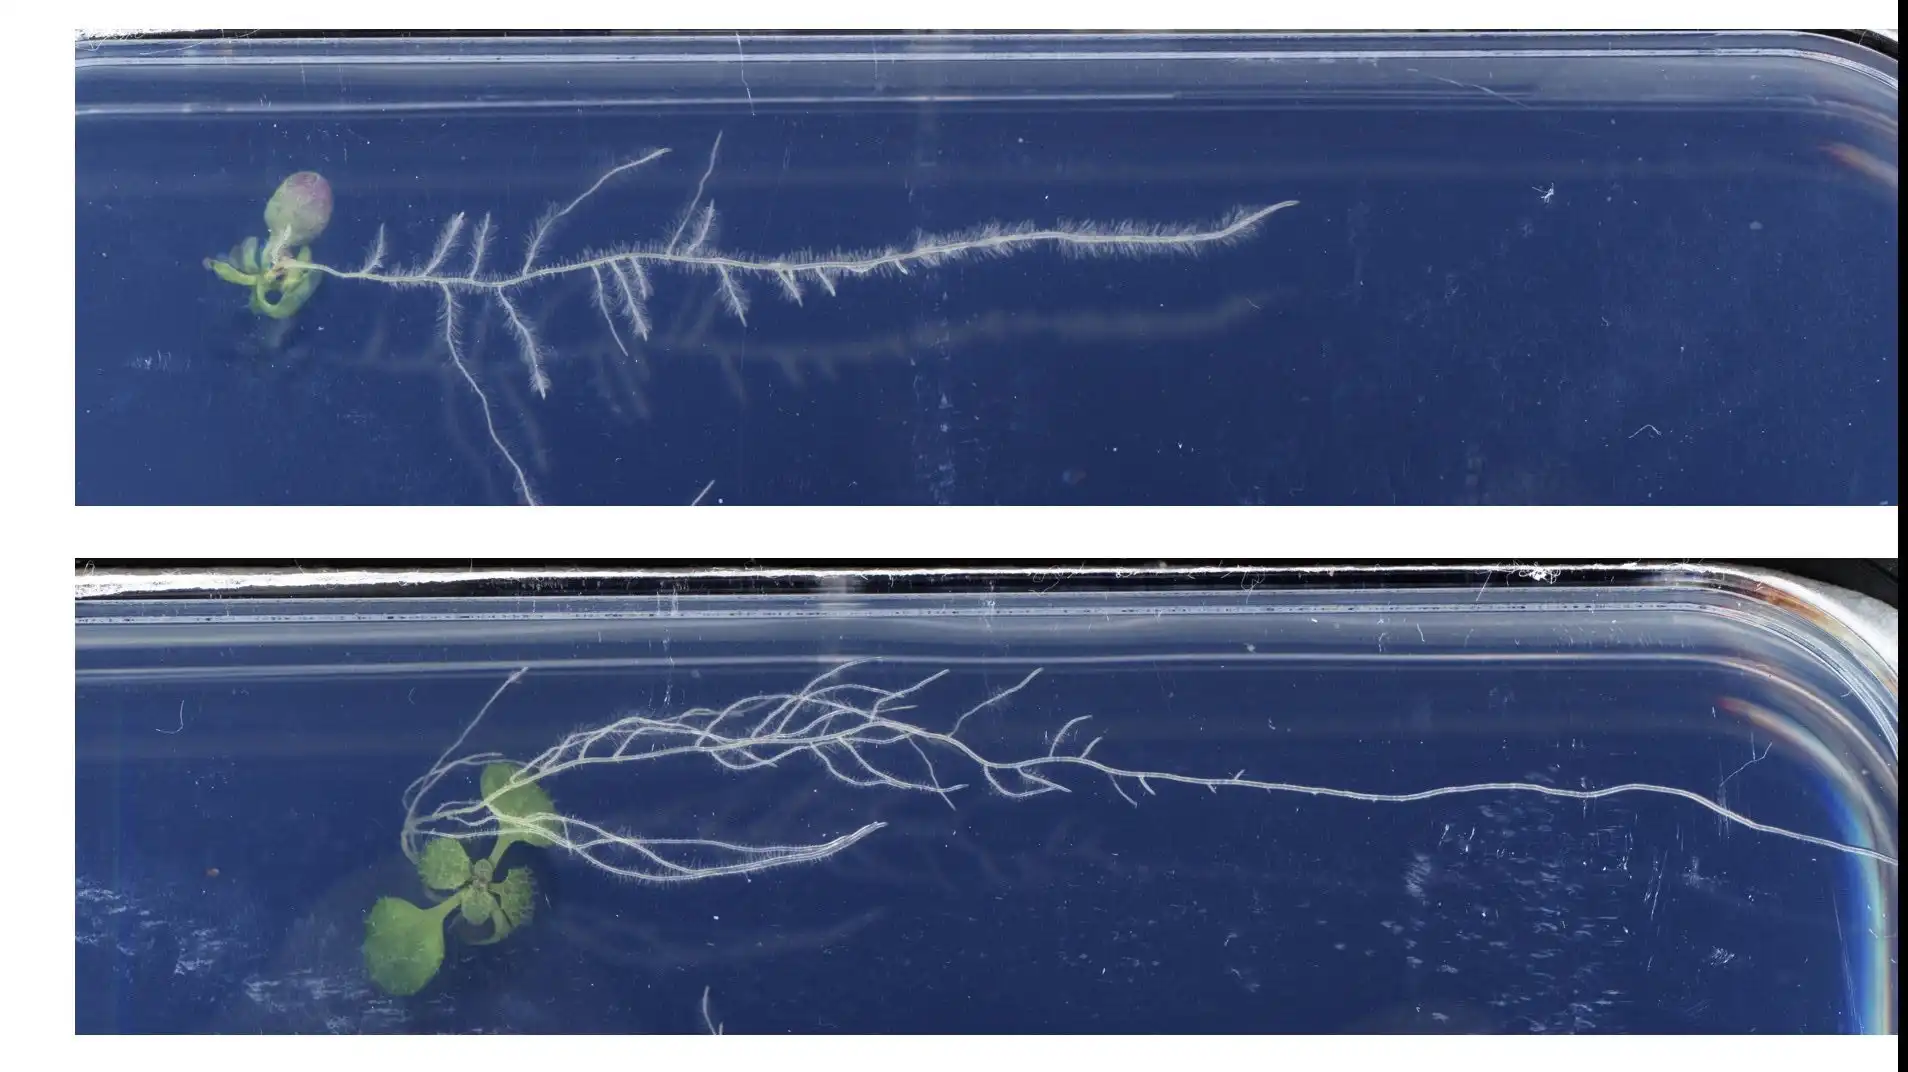 Untreated (left) and mebendazole treated (right) seedling of Arabidopsis thaliana growing on the surface of vertical agar plates. While the root branches of the untreated plant point downwards, mebendazole leads to the branches pointing much more sidewards, leading to a shallower root system. Credit: Salk Institute